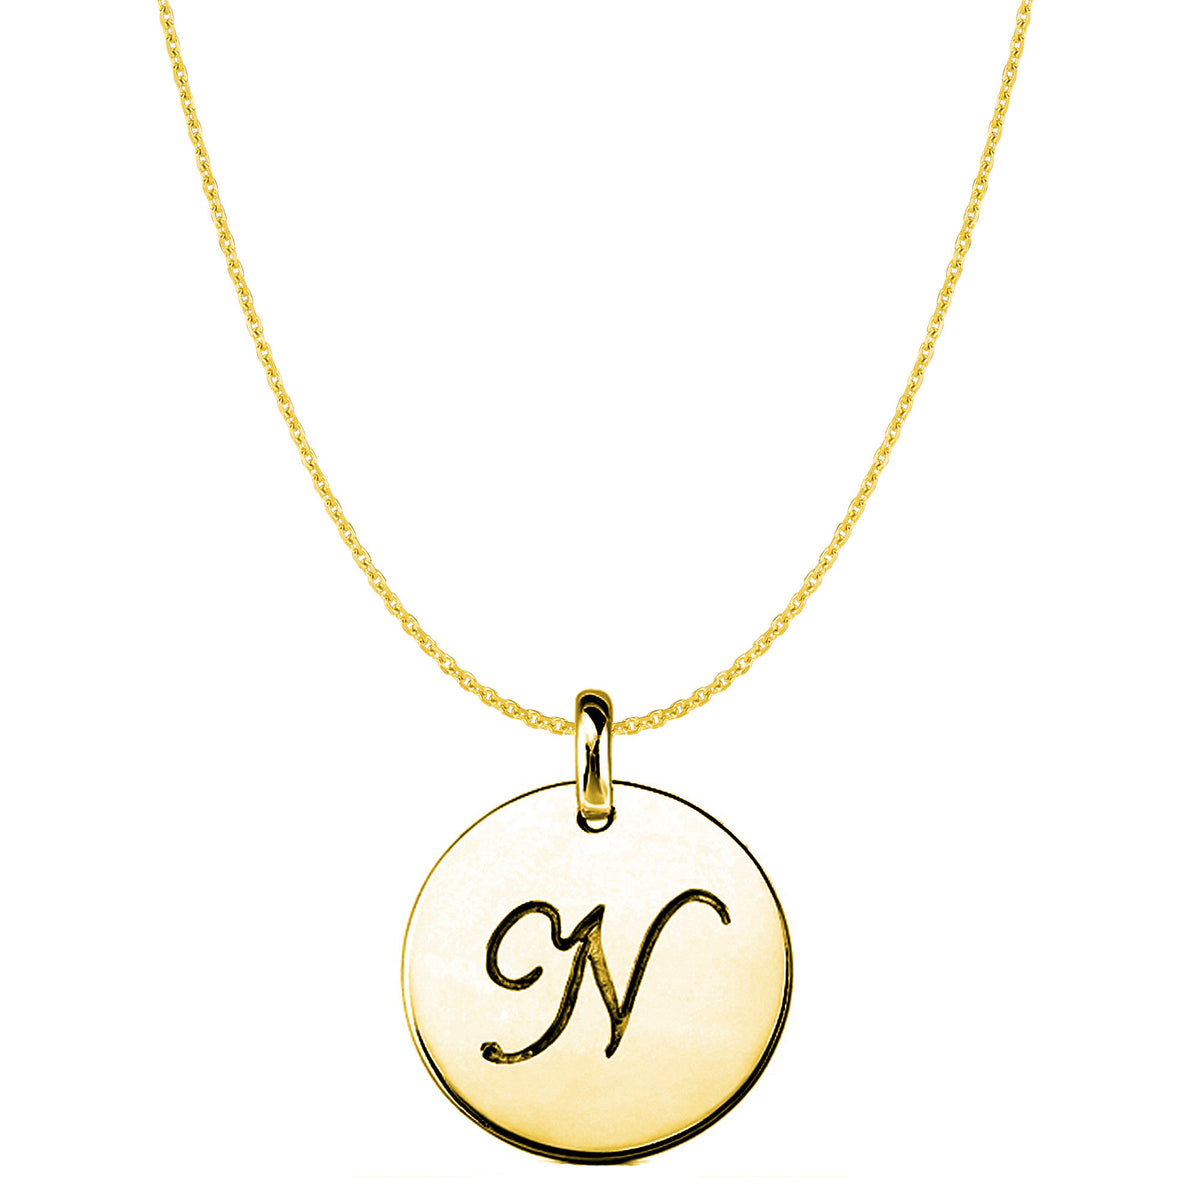 "N" 14K Yellow Gold Script Engraved Initial Disk Pendant fine designer jewelry for men and women